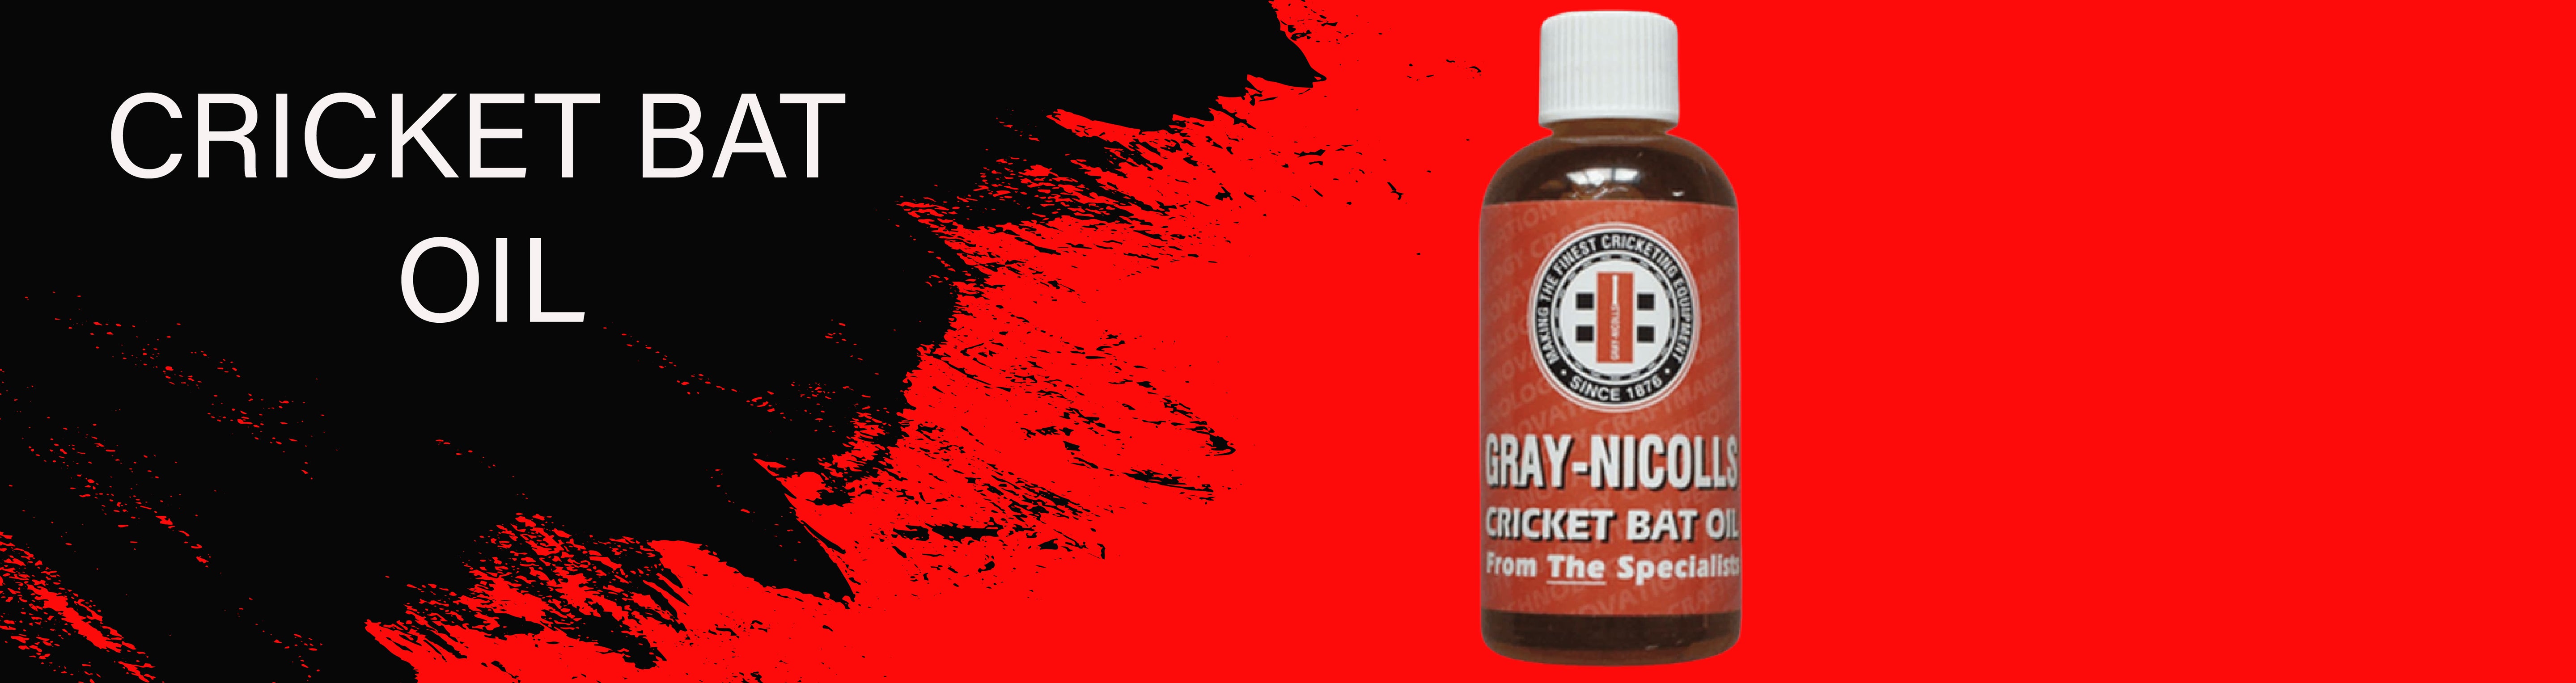 Collection Image CRICKET BAT OIL